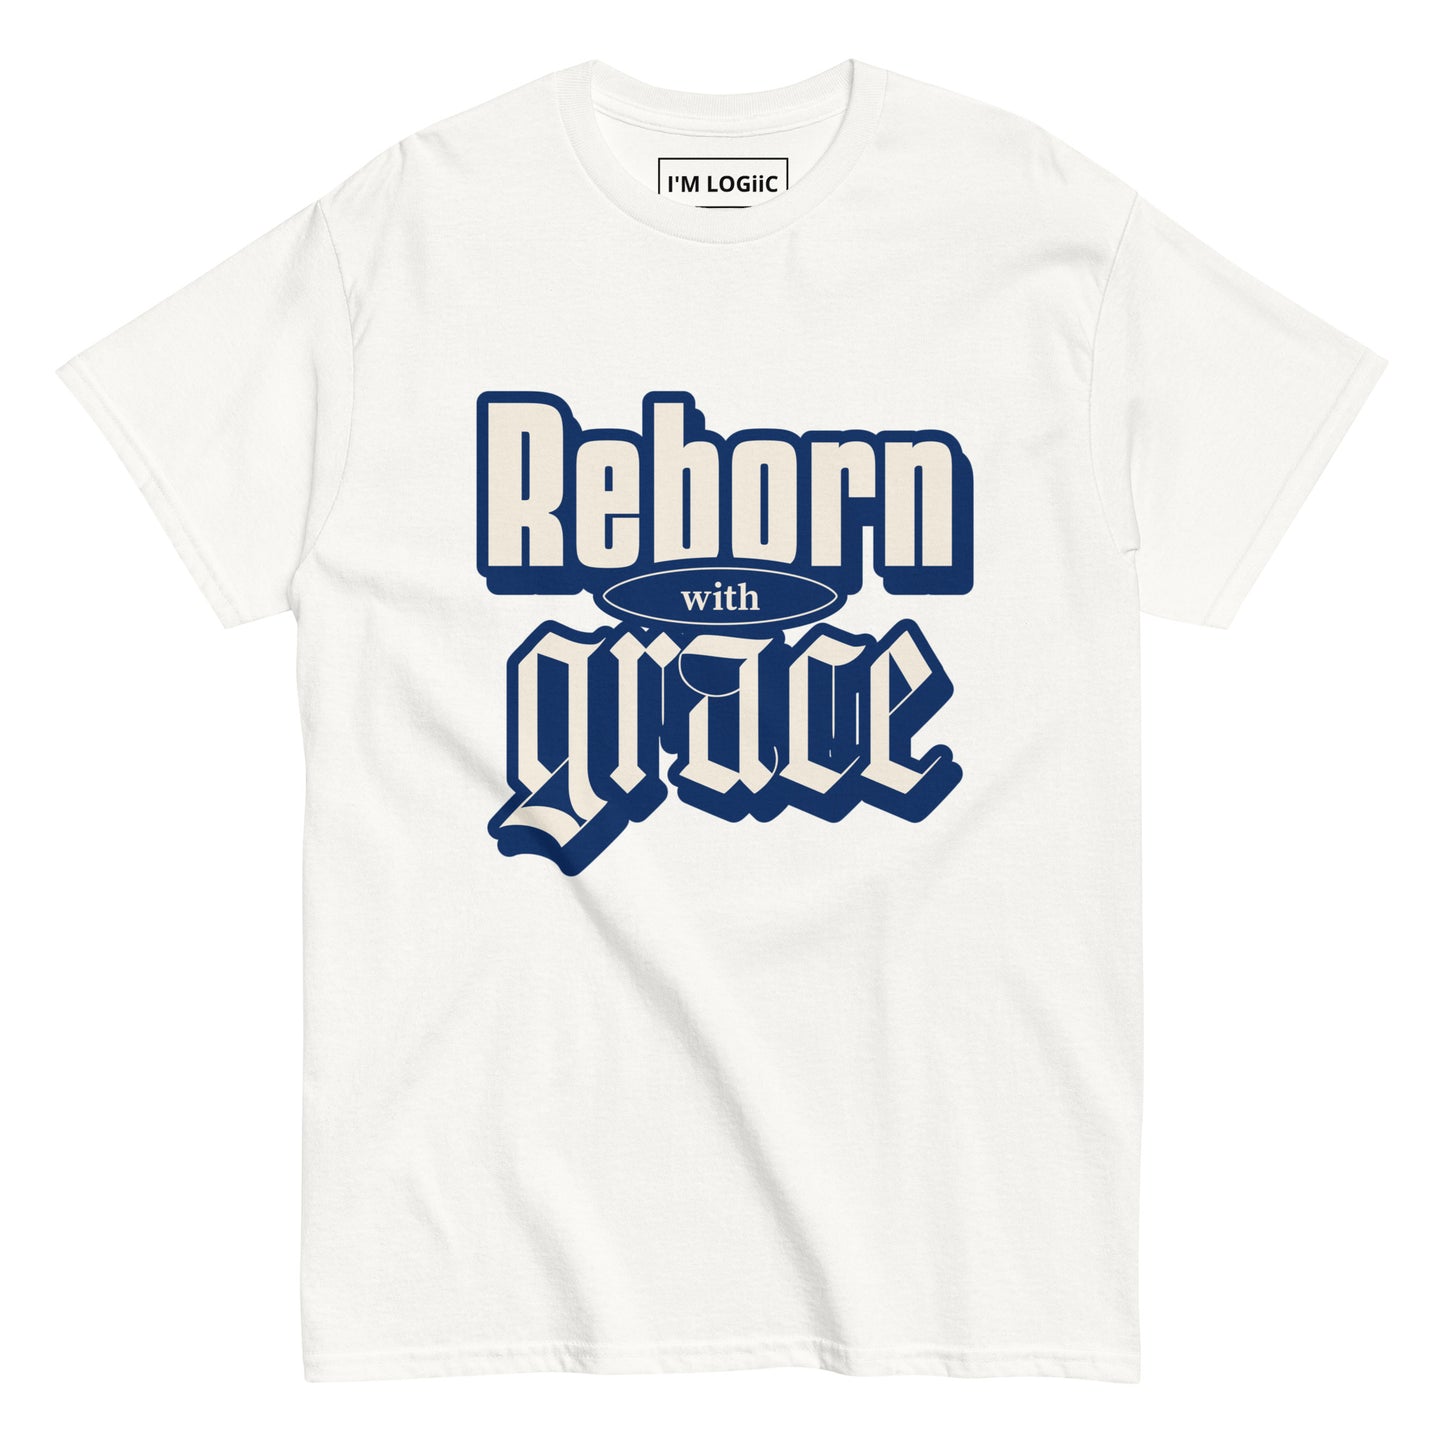 Reborn with Grace classic tee